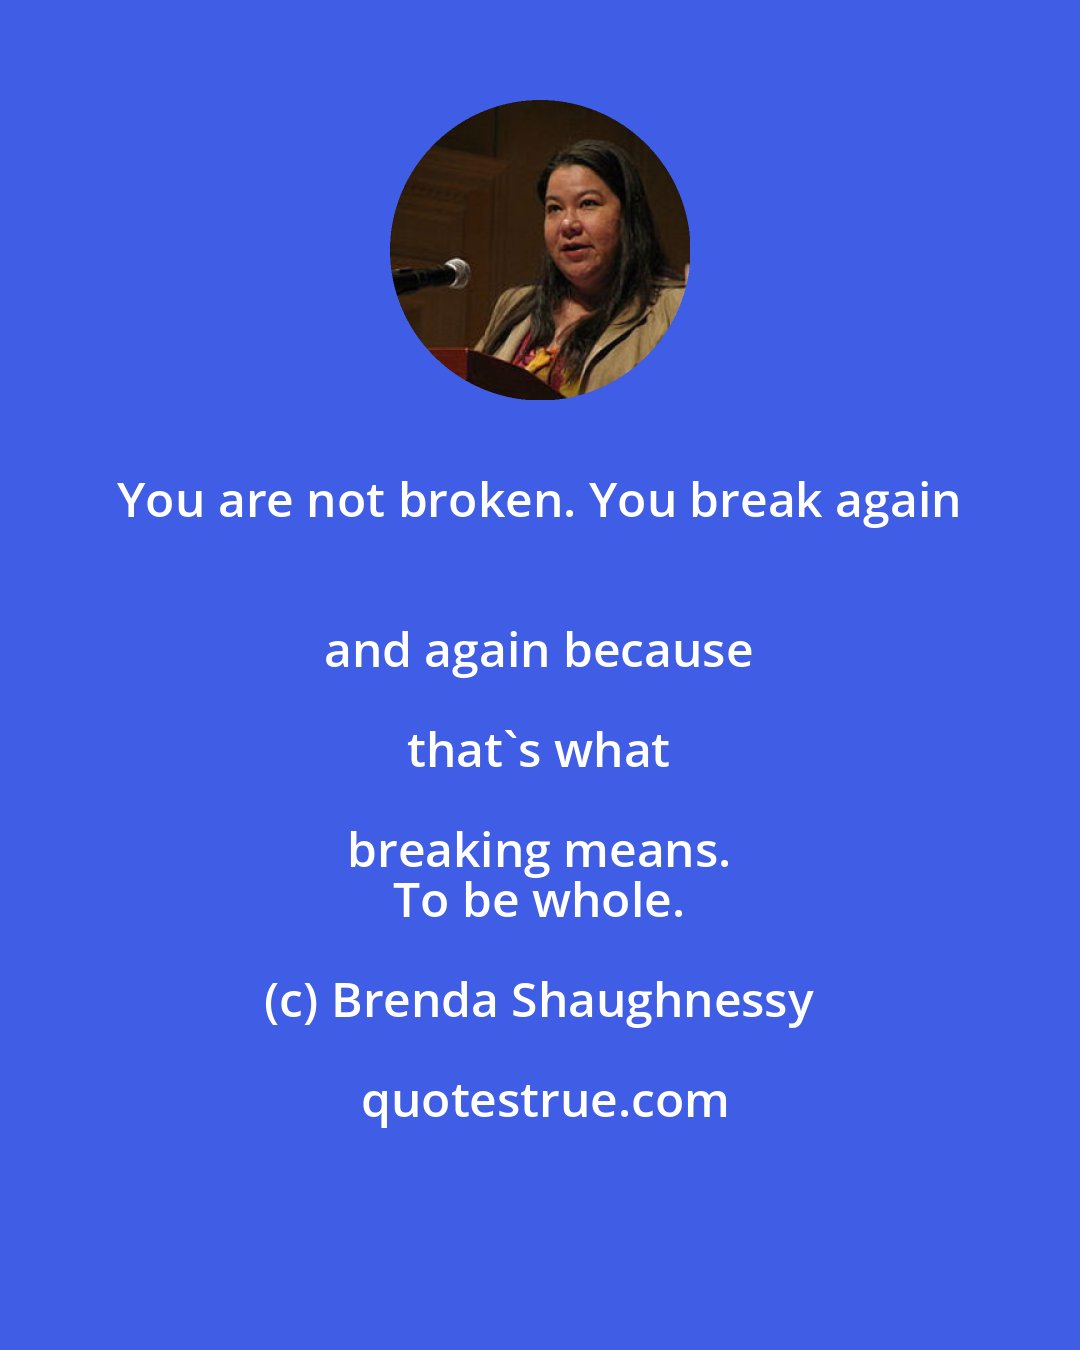 Brenda Shaughnessy: You are not broken. You break again 
 and again because 
 
 that's what breaking means. 
 To be whole.